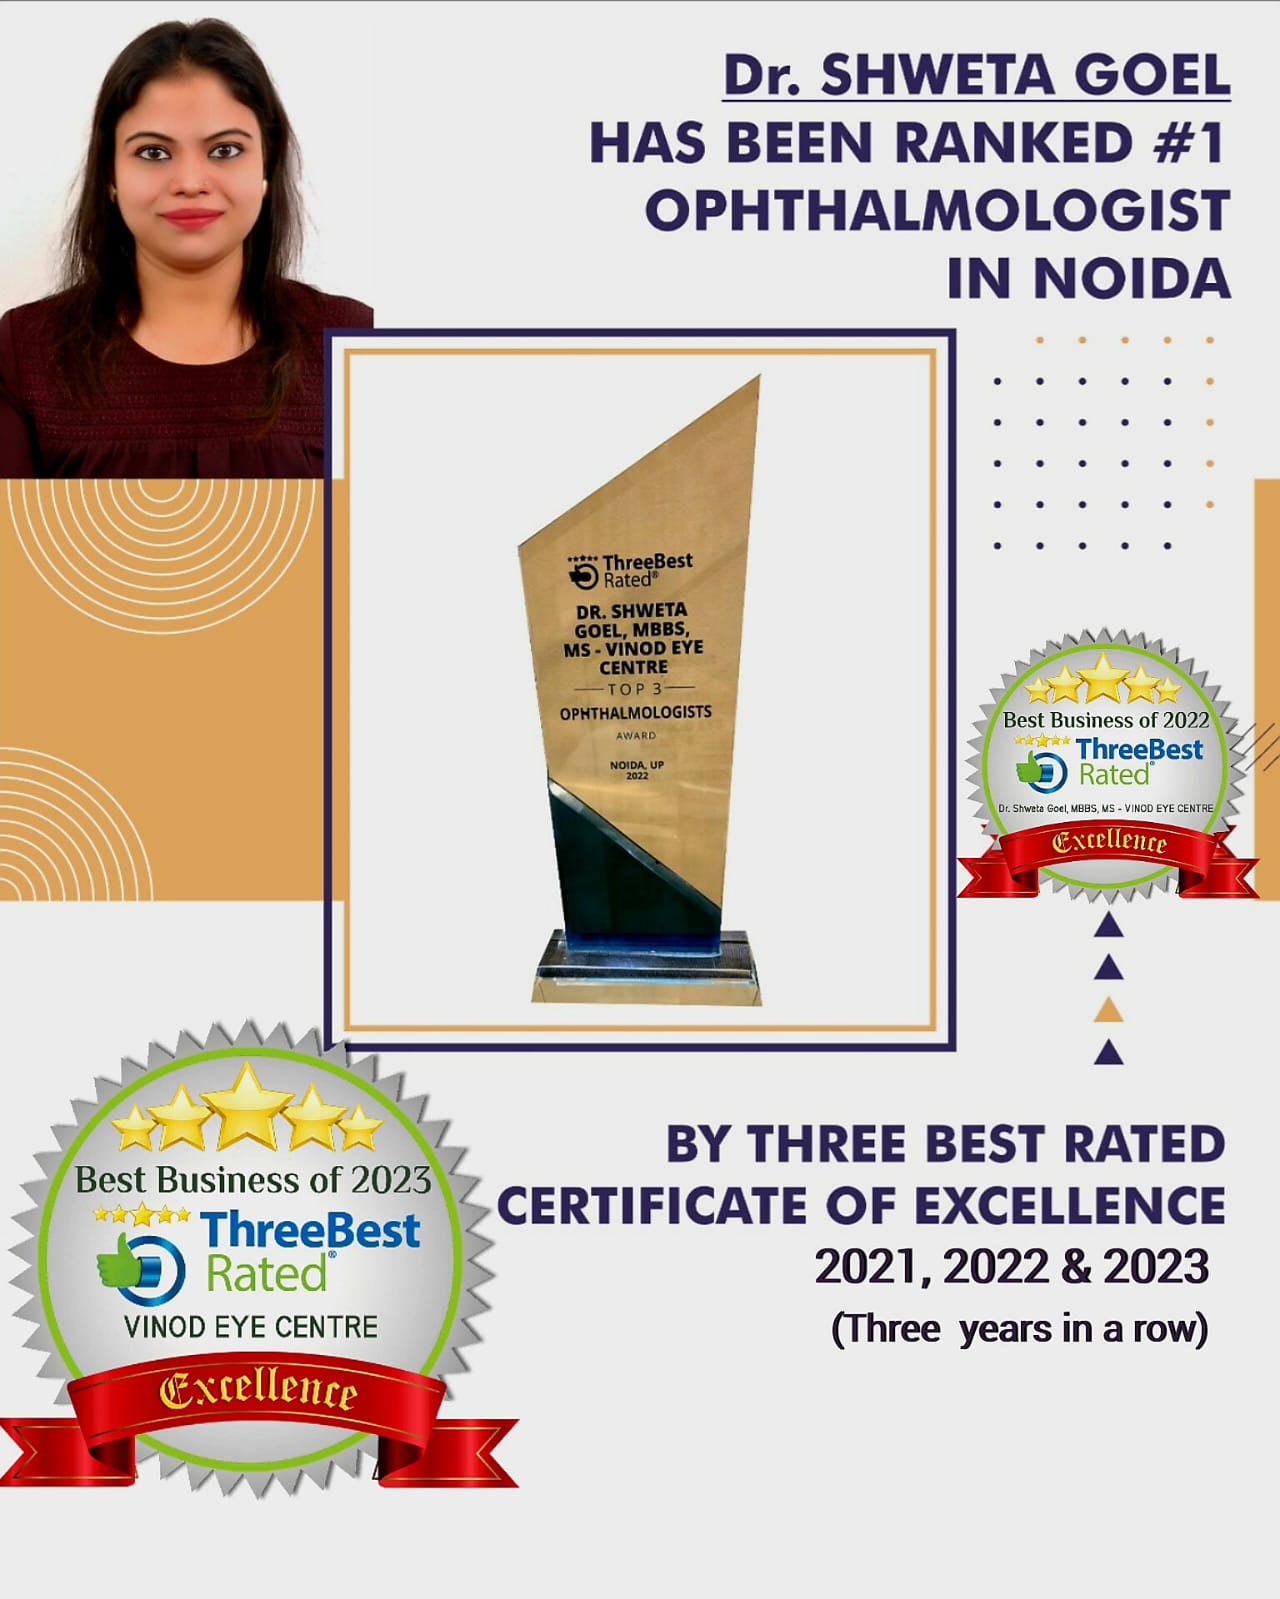 " RANKED NO 1 OPHTHALMOLOGIST BY THREE BEST RATED "